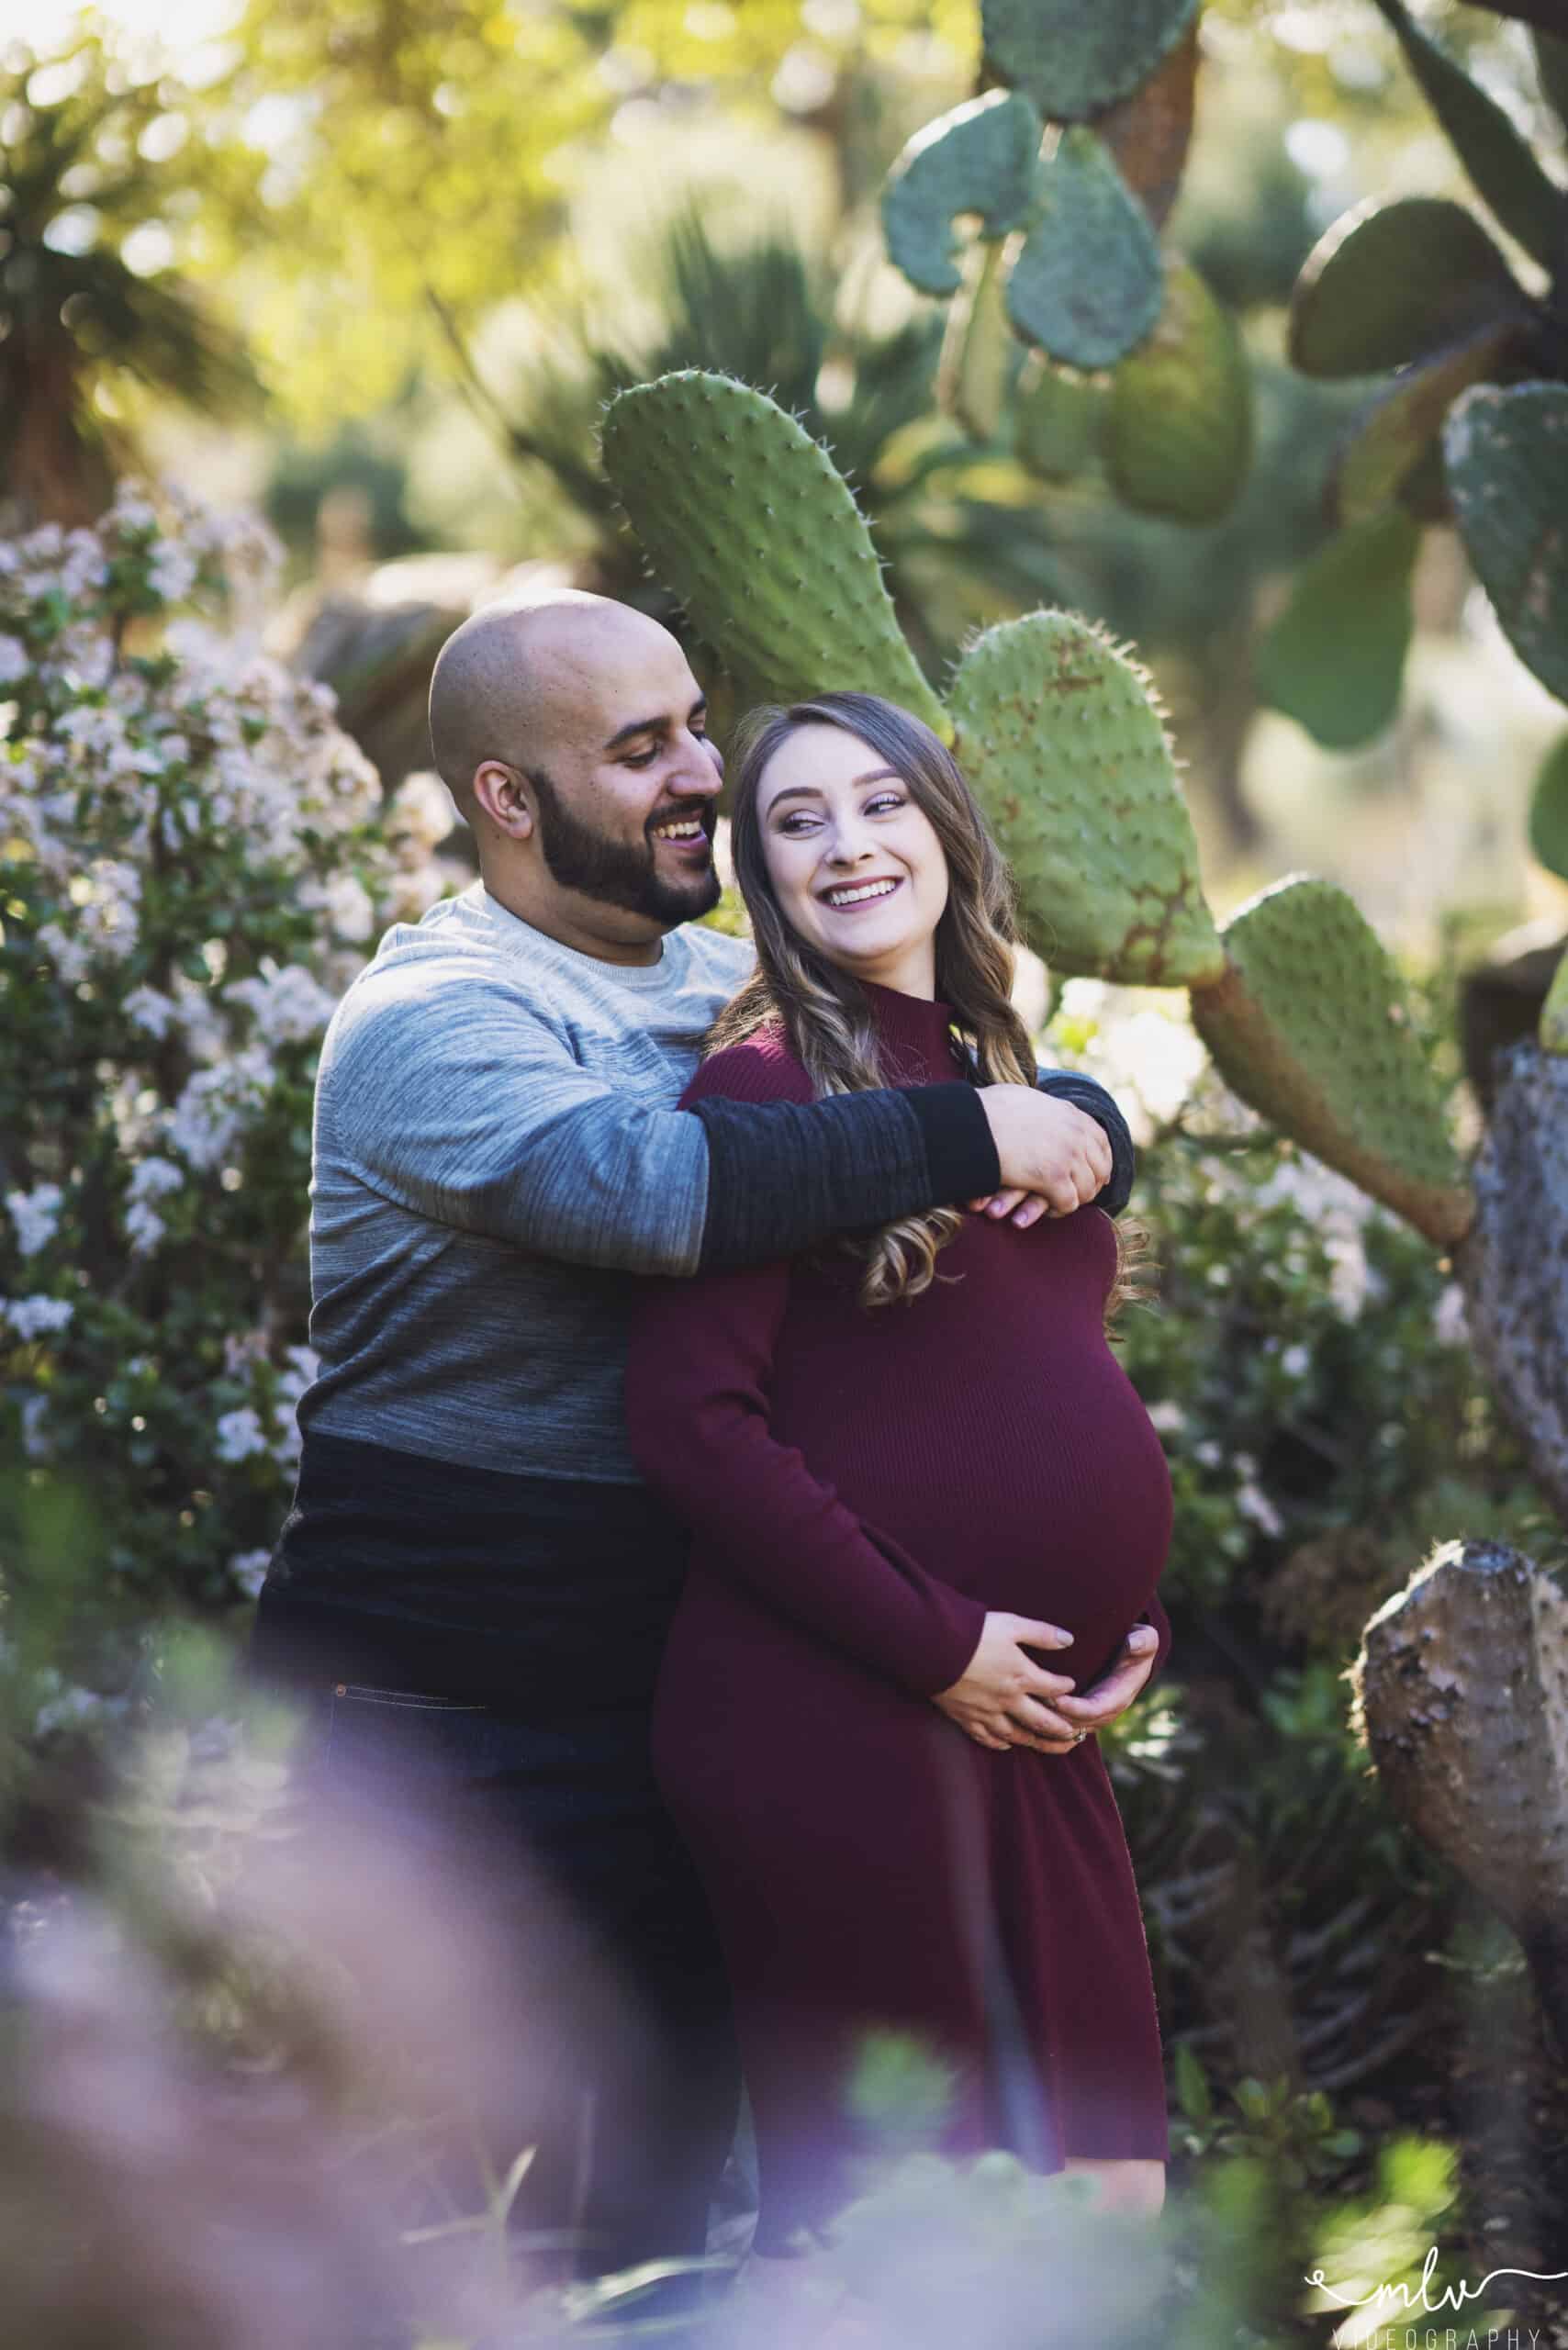 Maternity photography at Arizona Cactus Garden in Stanford University Campus